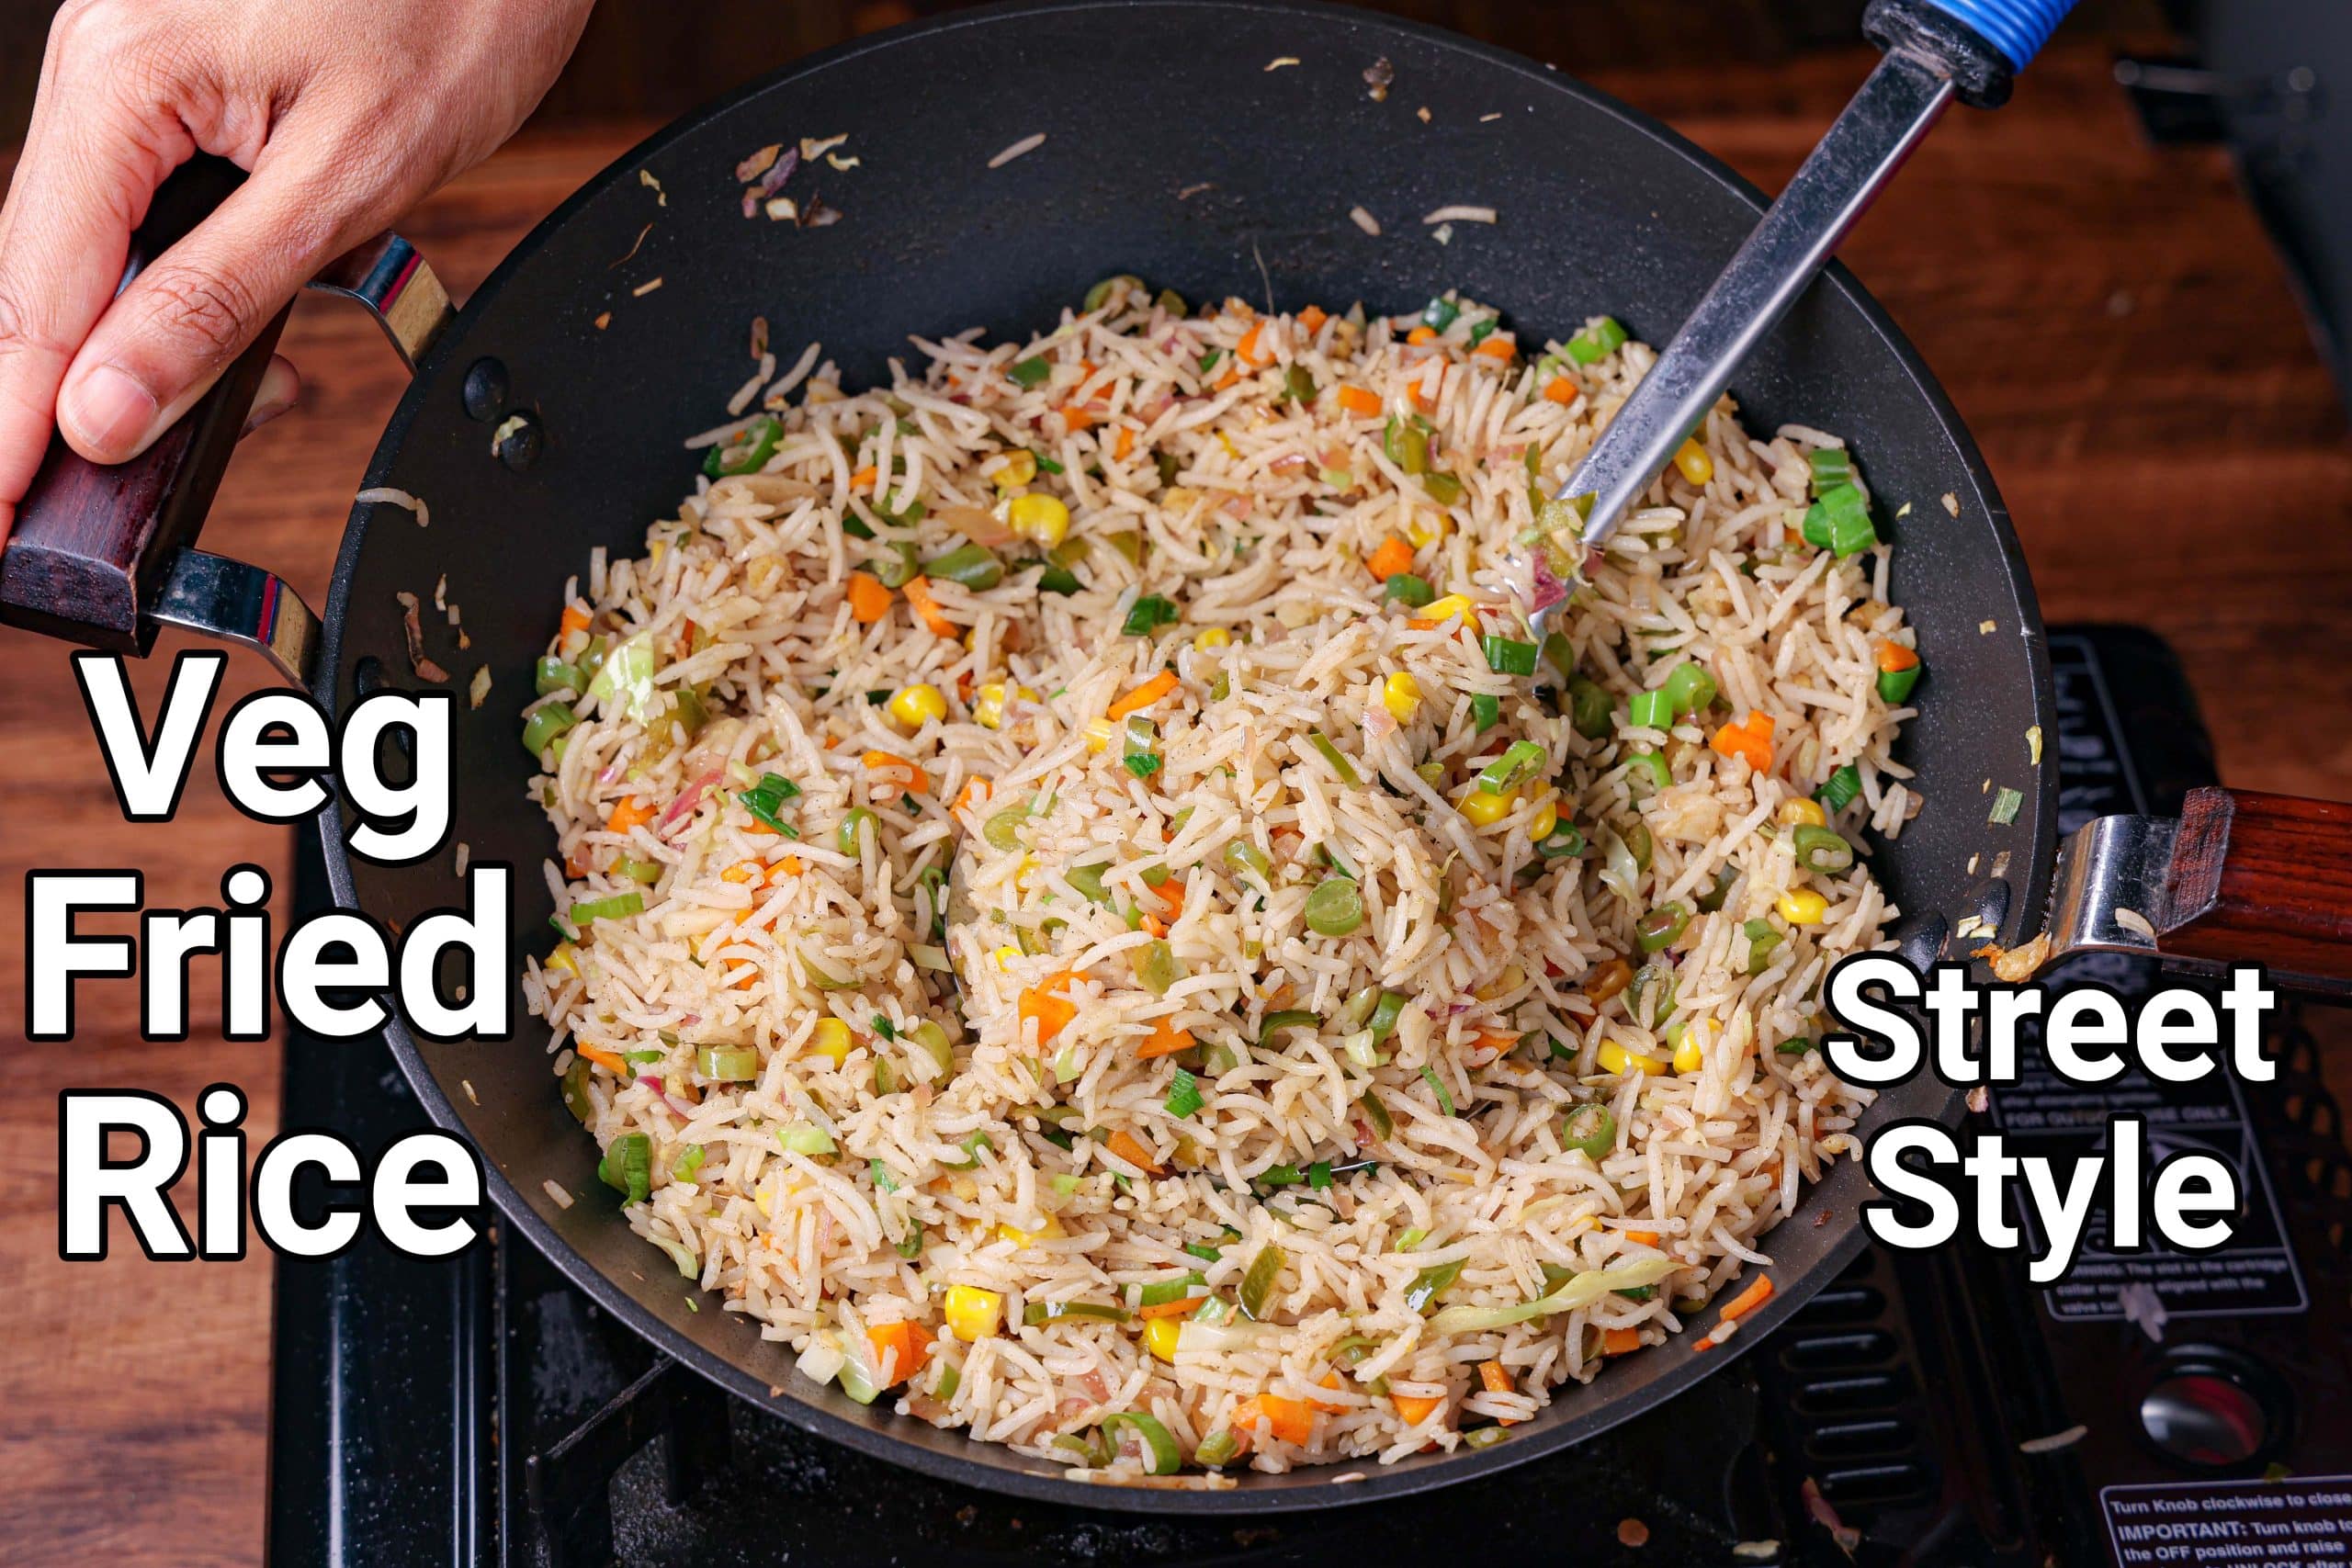 Restaurant Secrets: How To Cook The Perfect Fried Rice